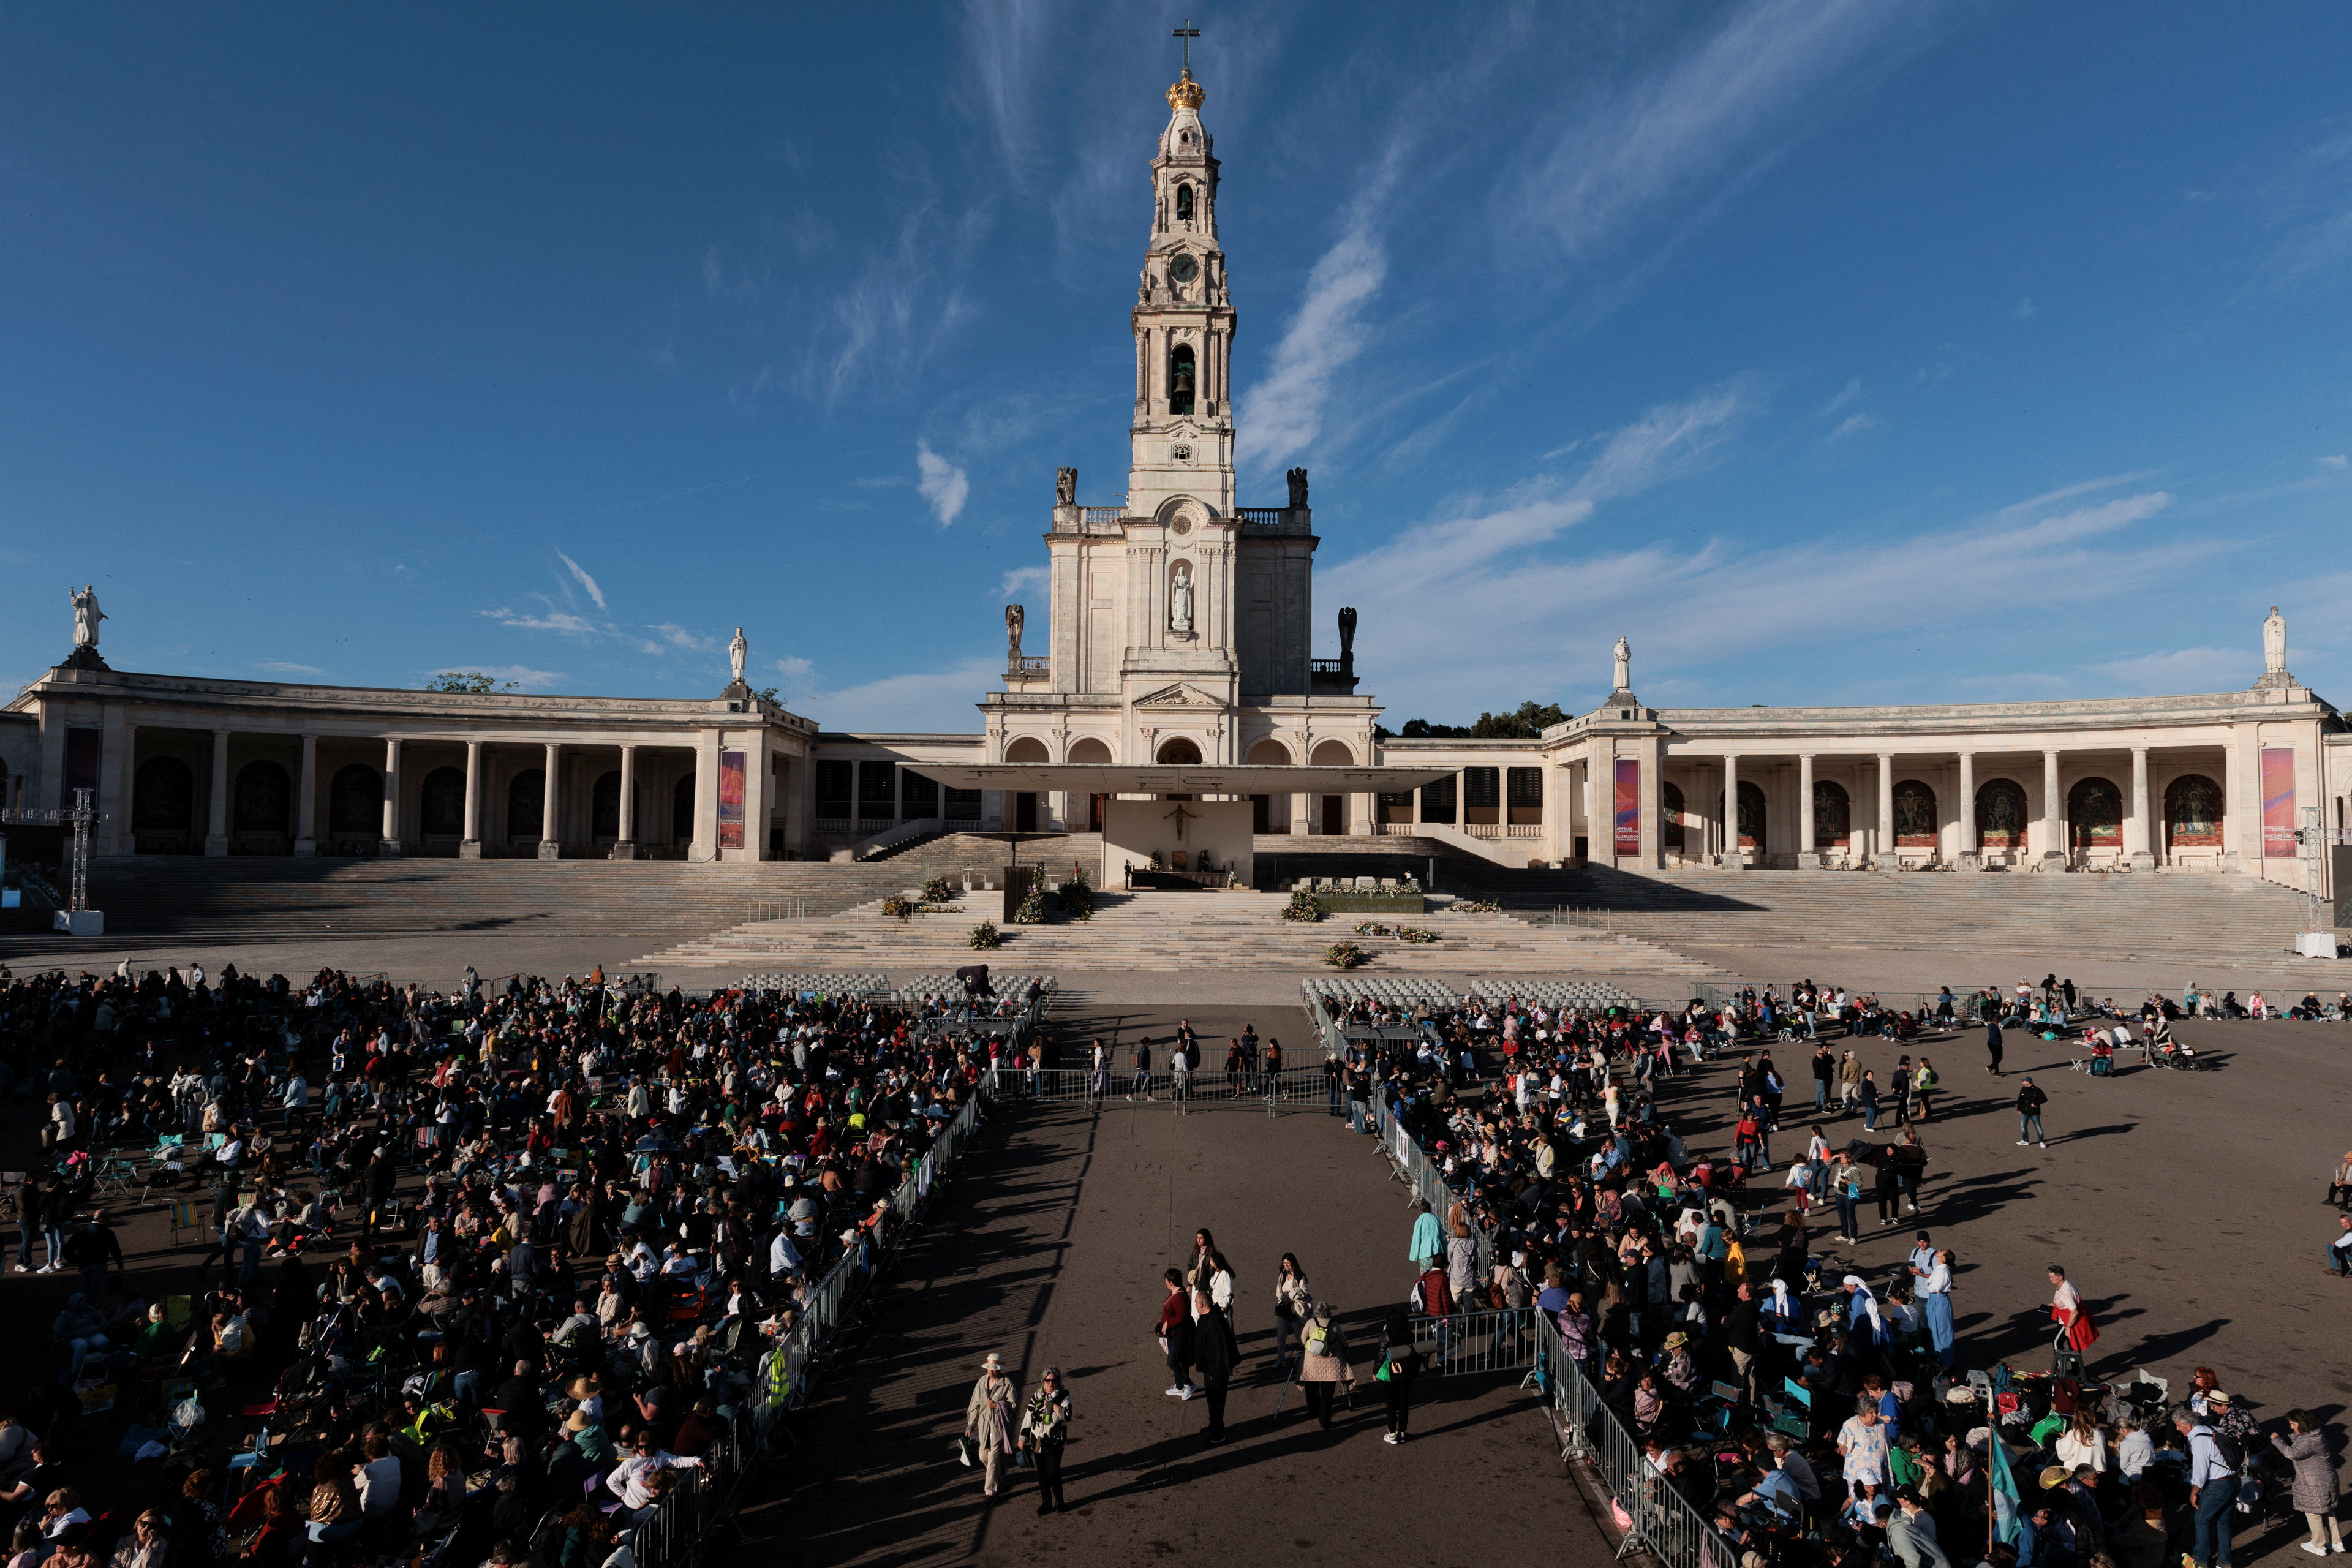 Pilgrims attend the event marking the anniversary of the reported appearance of the Virgin Mary to three shepherd children, at the Catholic shrine of Fatima